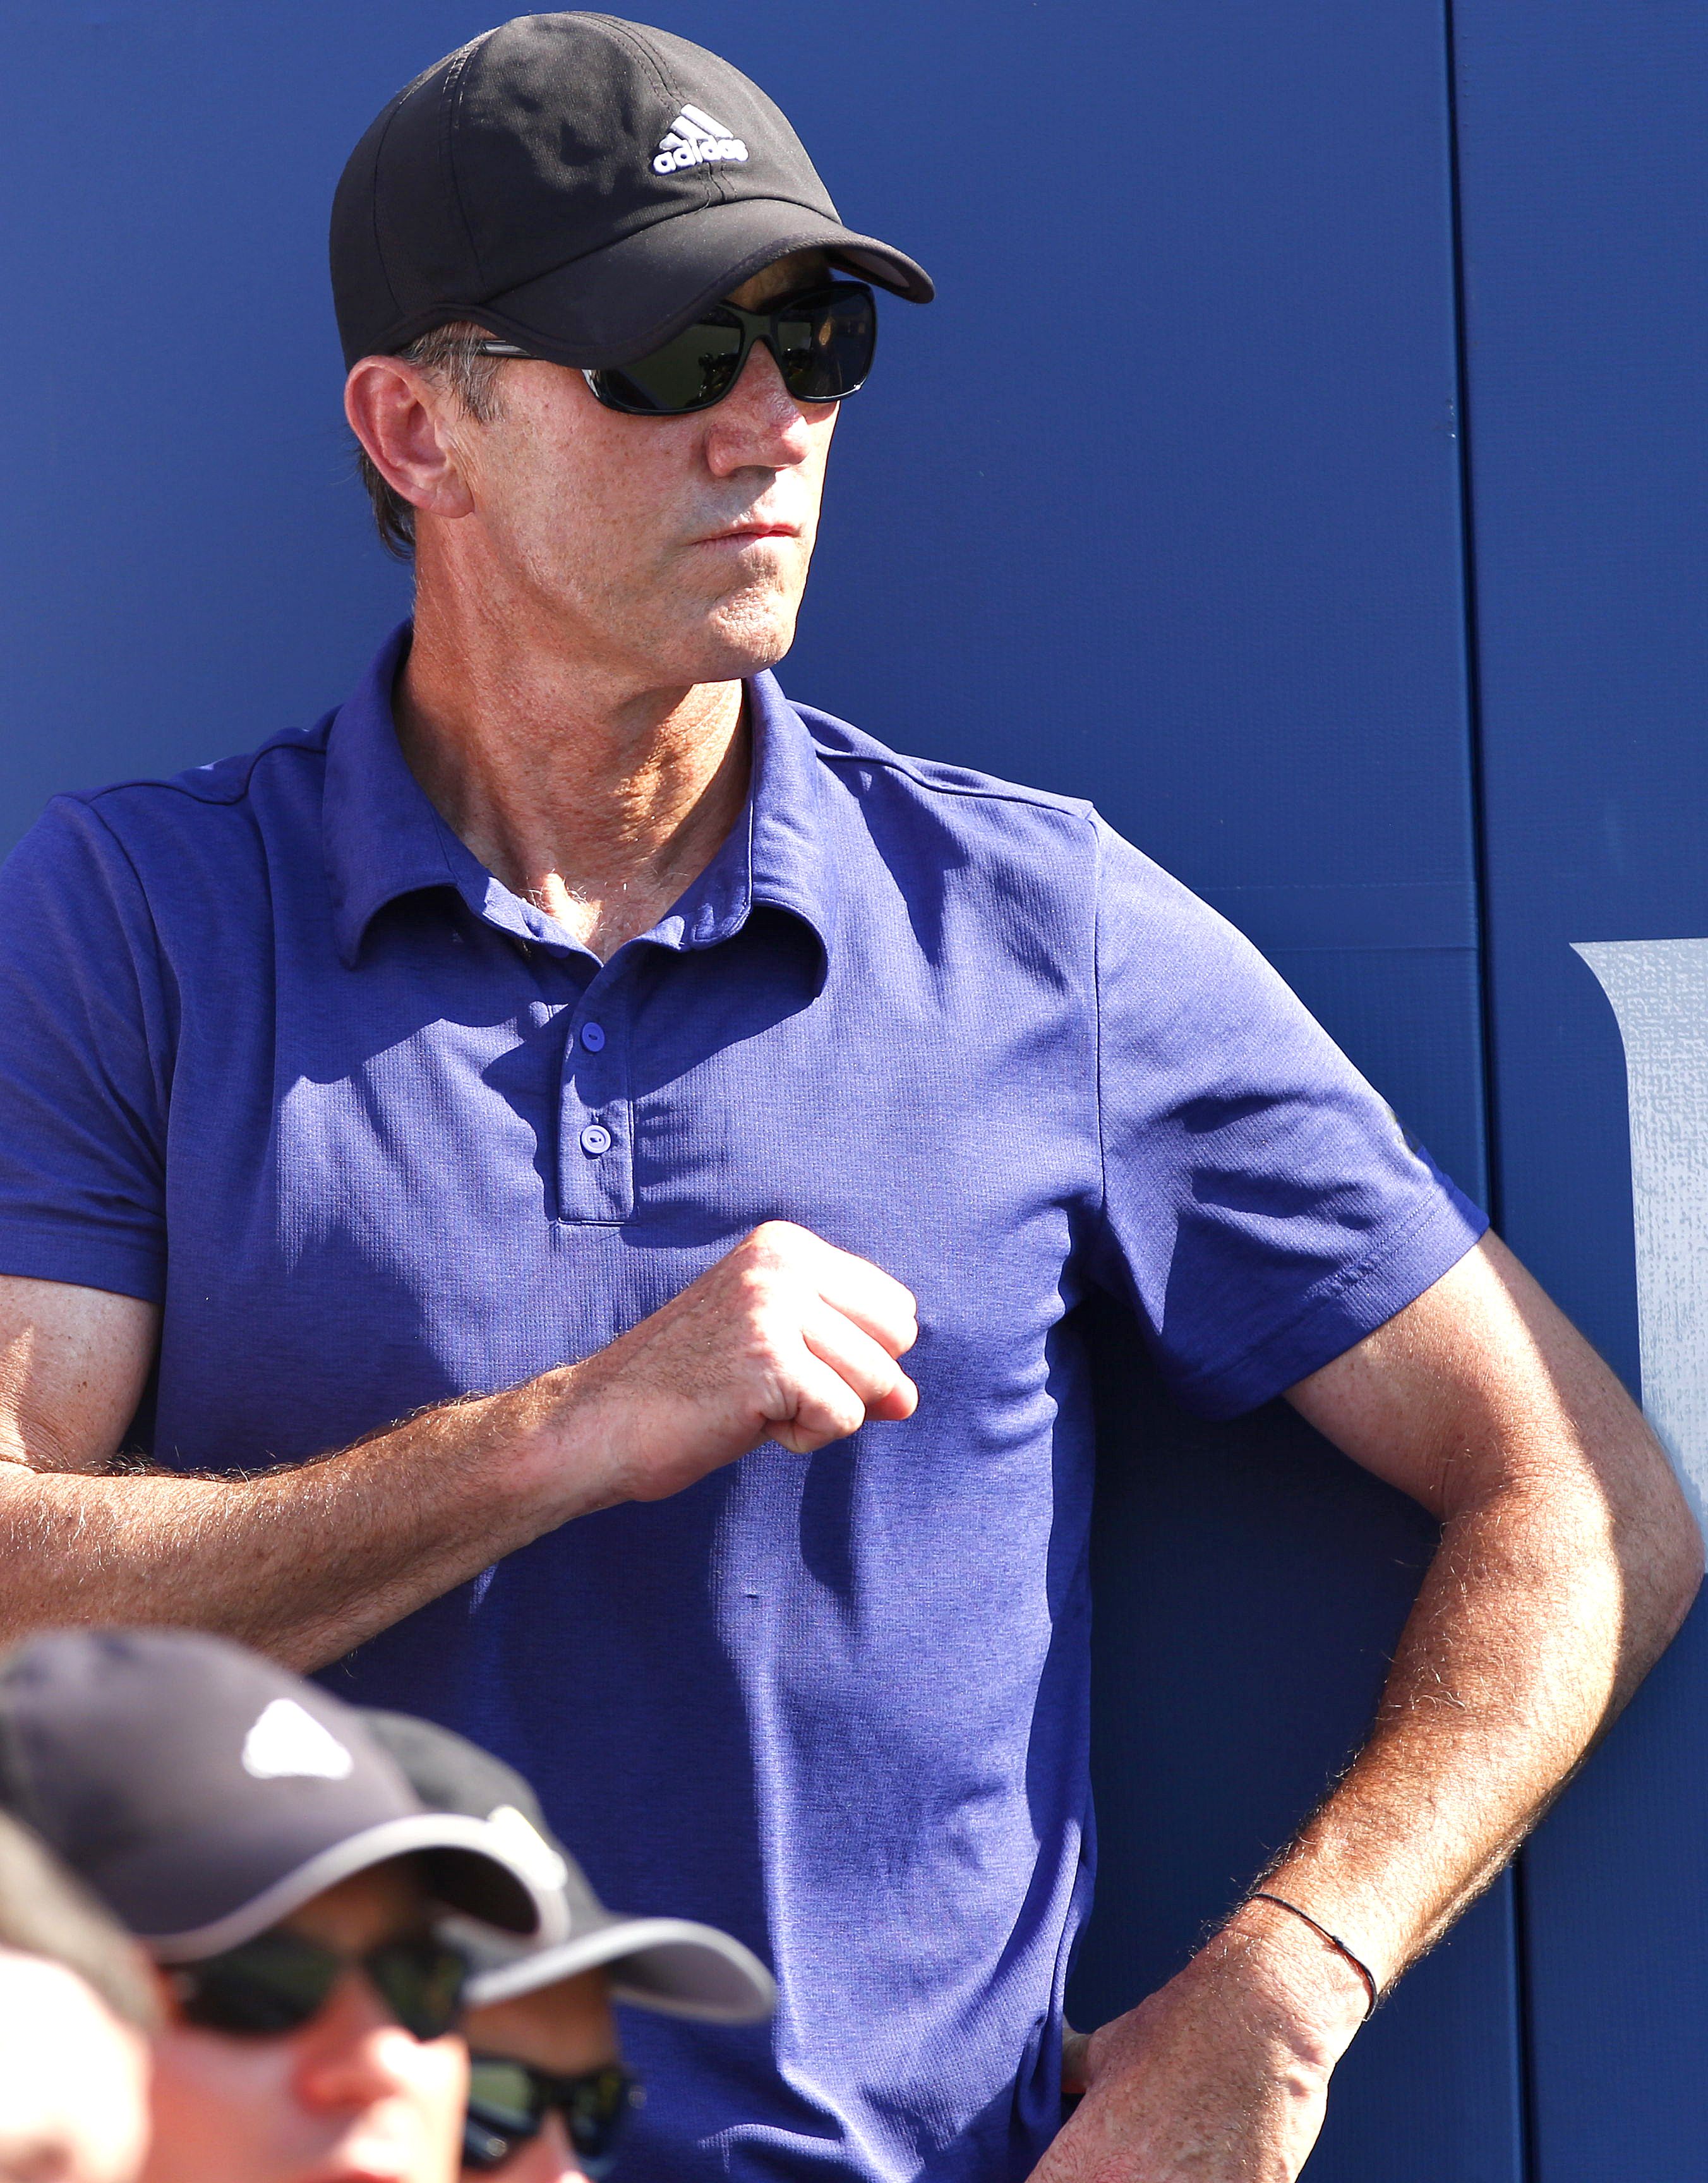 An interview with commentator and coach Darren Cahill